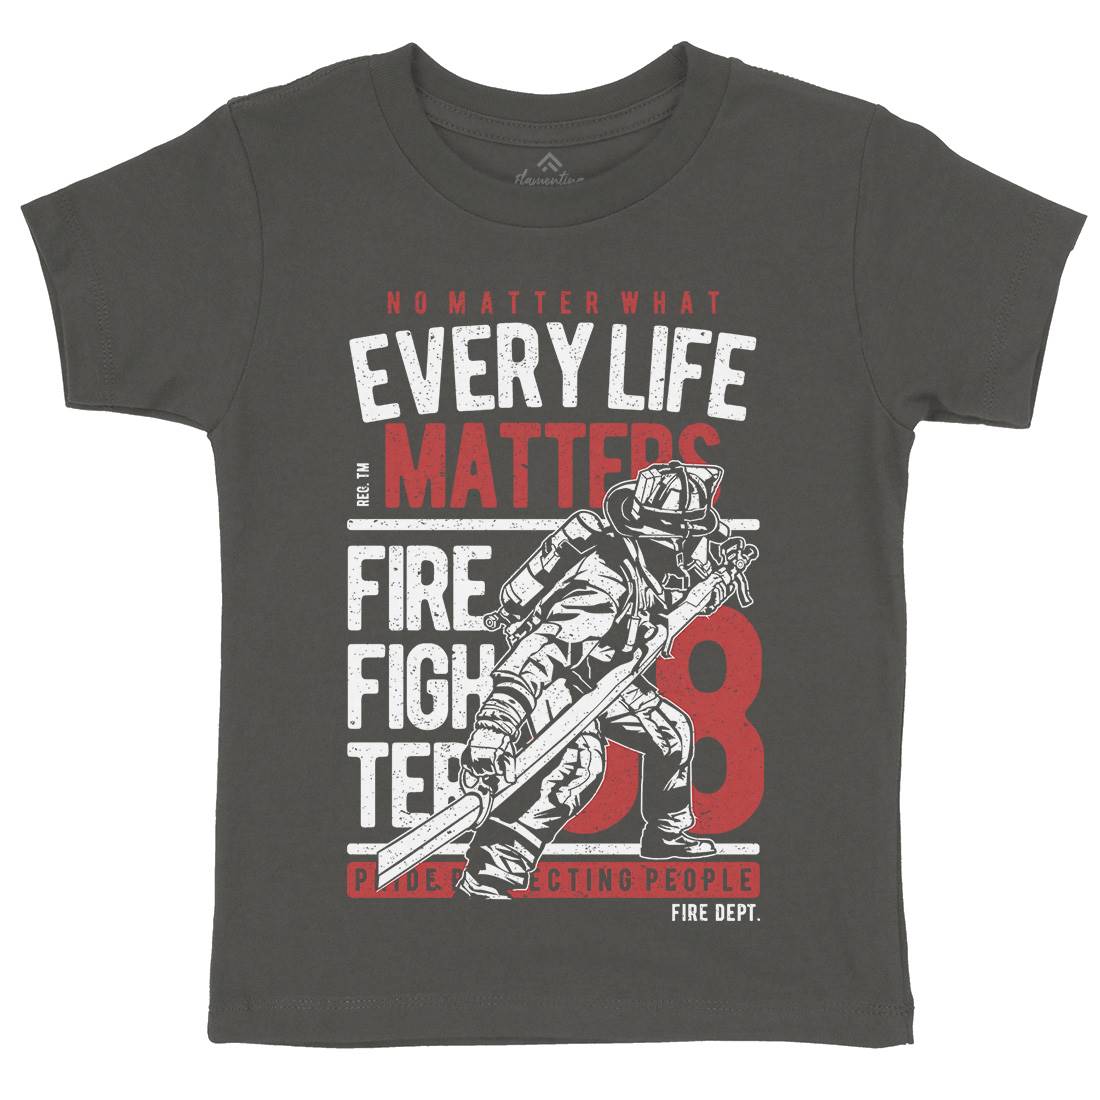 Every Life Matters Kids Crew Neck T-Shirt Firefighters A650